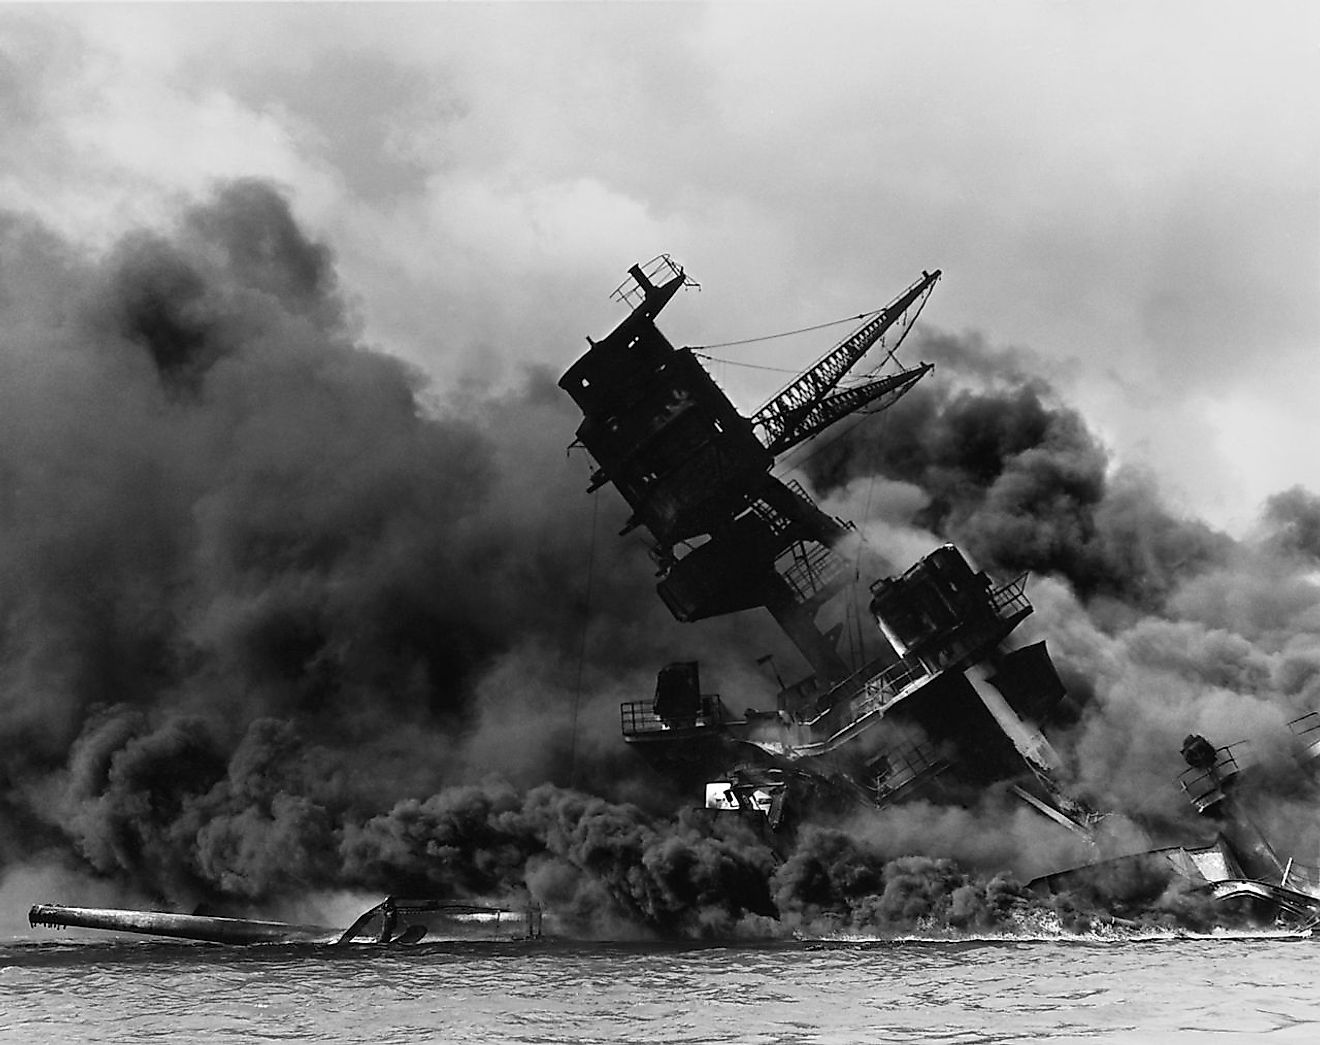 The USS Arizona (BB-39) burning after the Japanese attack on Pearl Harbor.